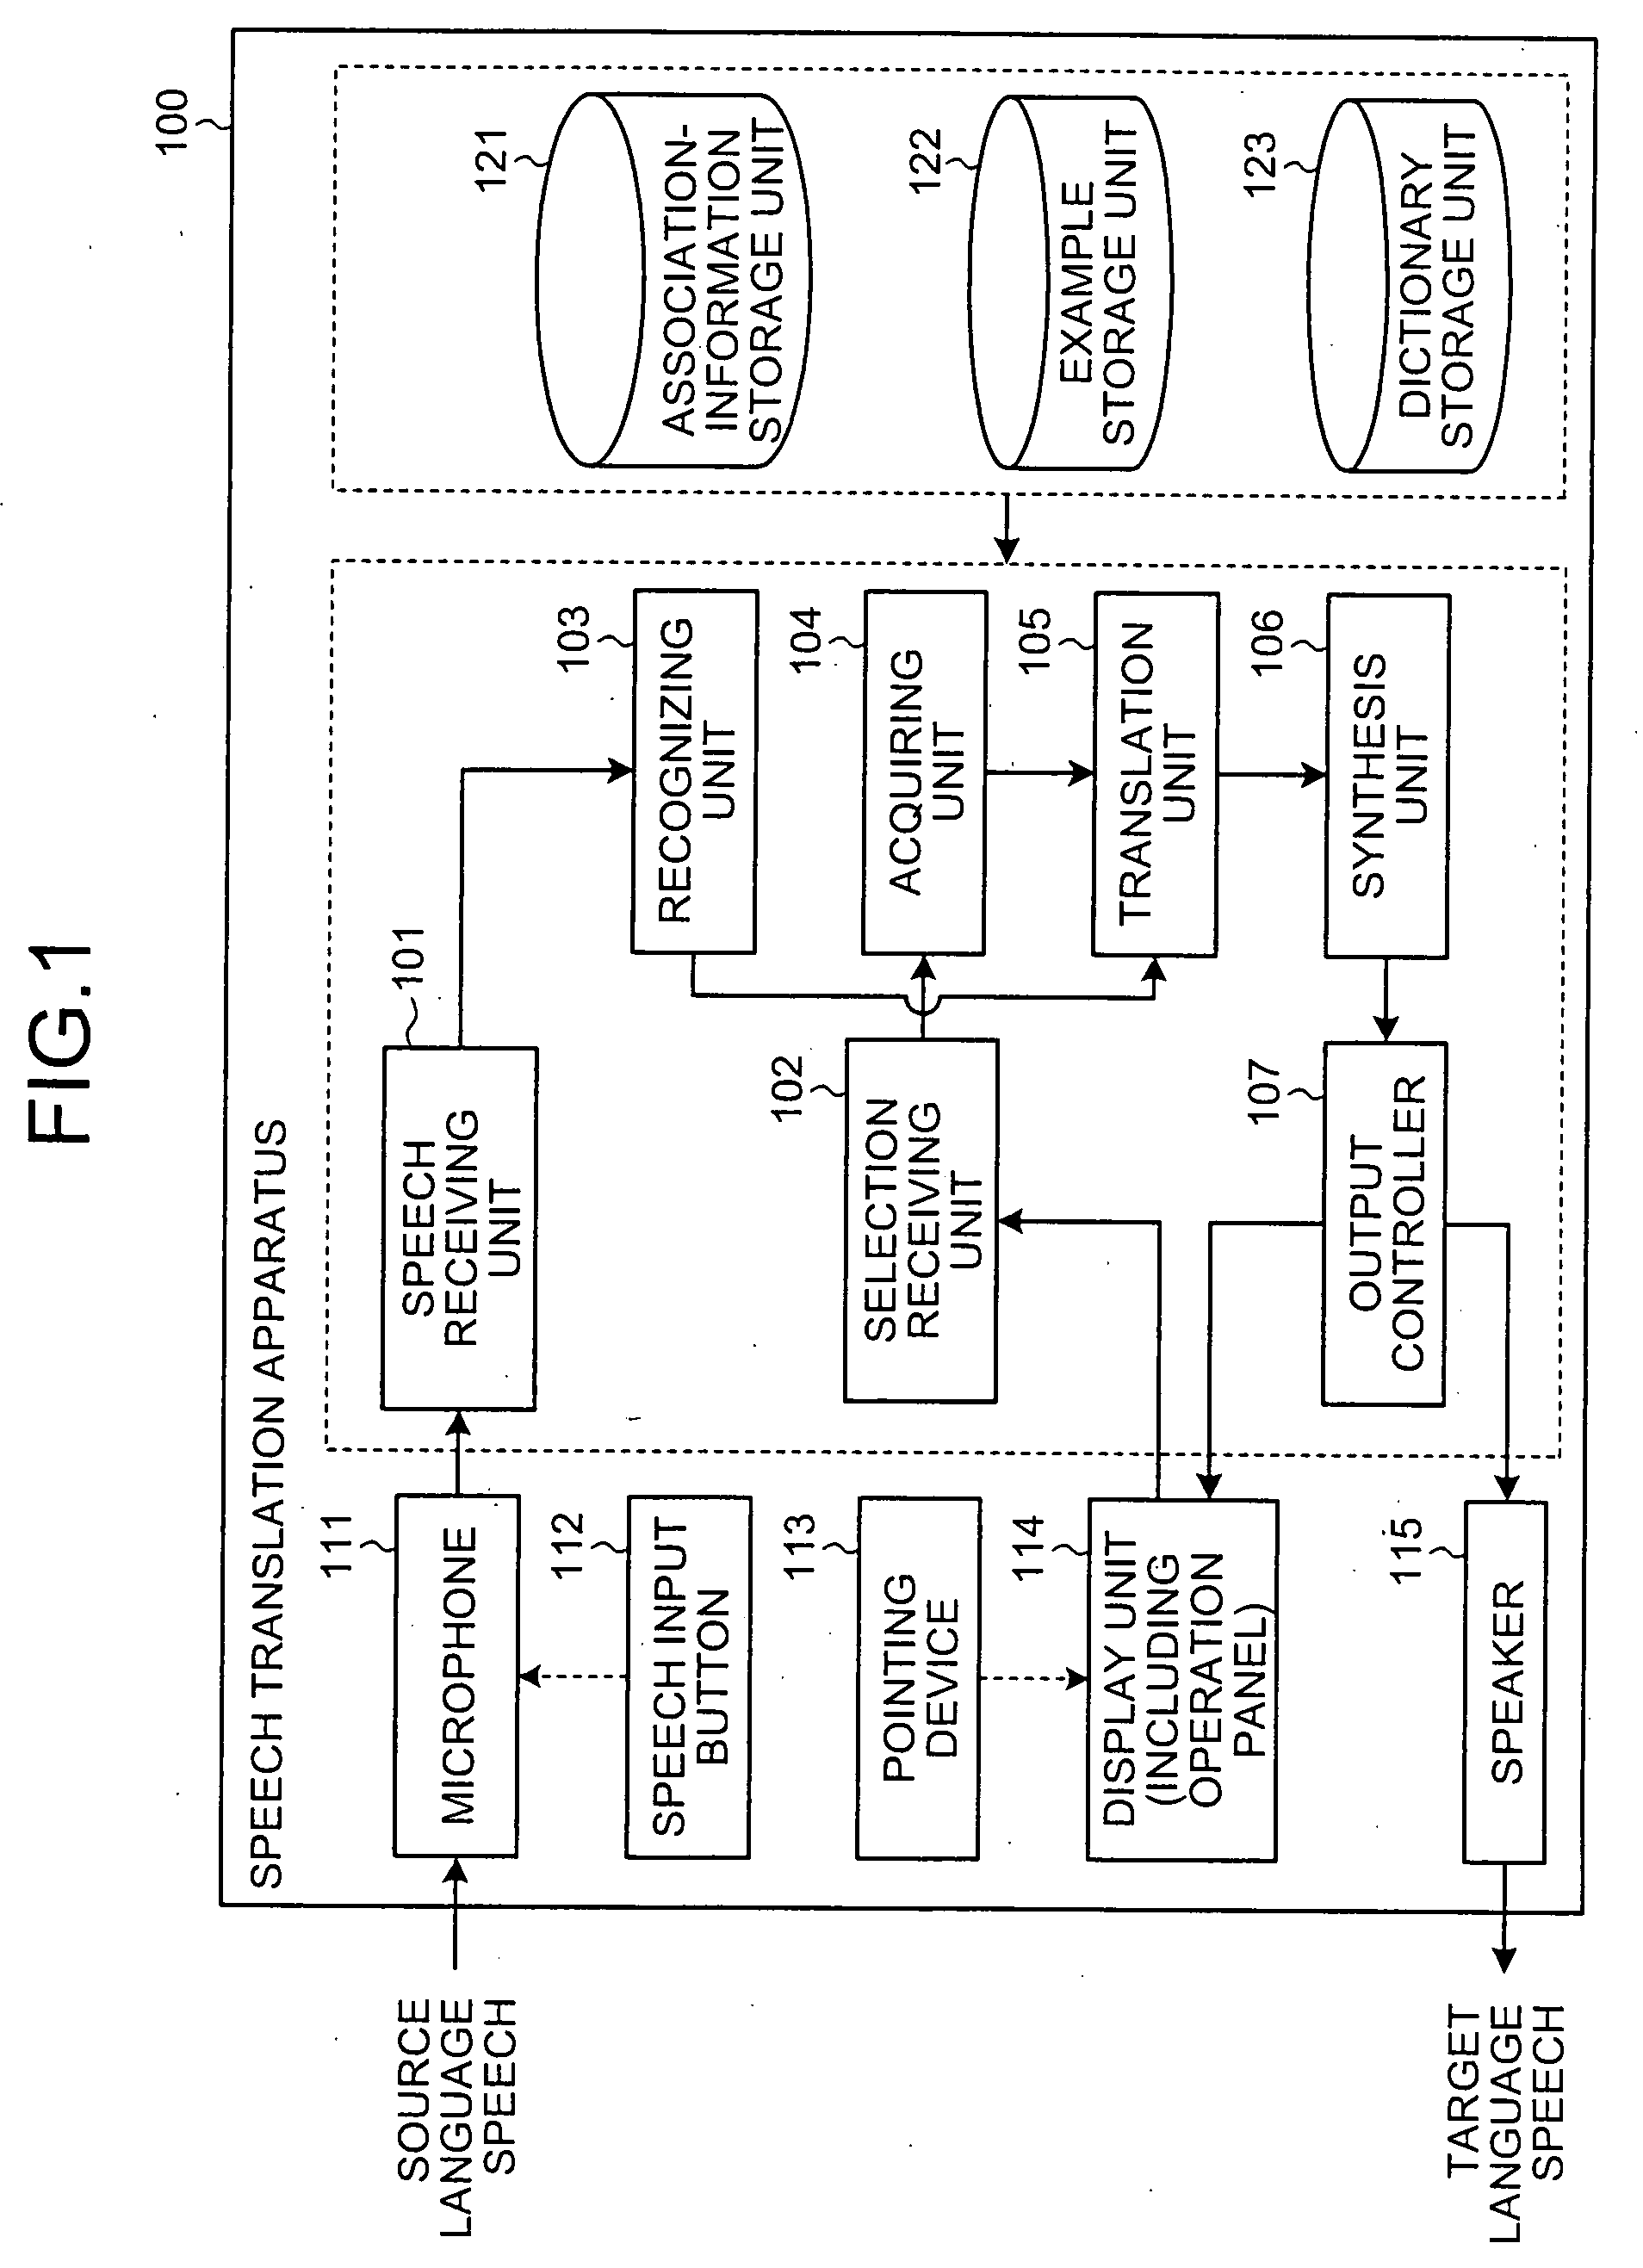 Apparatus and method for translating speech in source language into target language, and  computer program product for executing the method